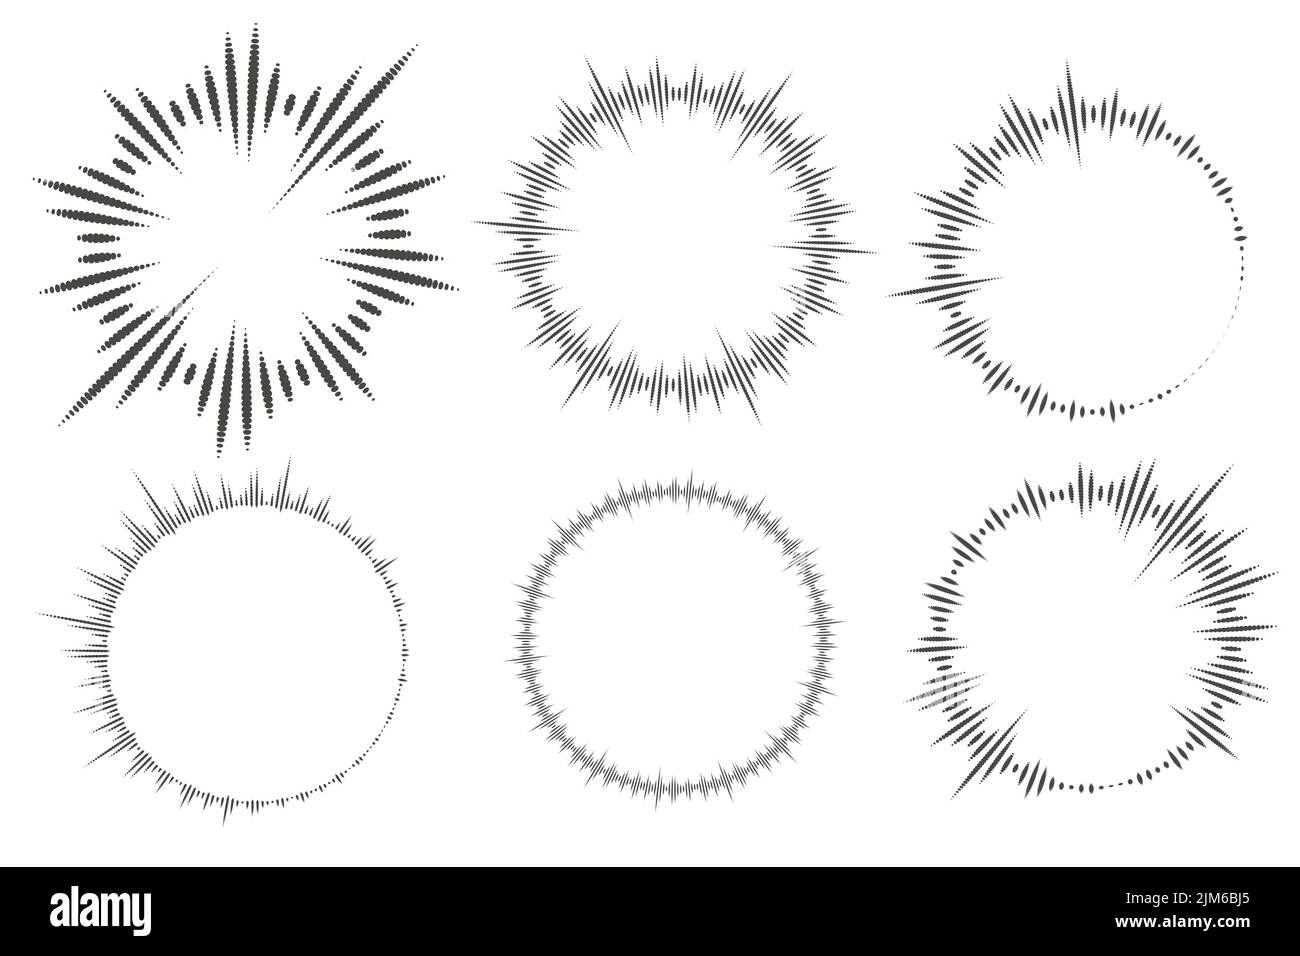 Circular music sounds equalizer. Circle audio waves. Abstract radial radio and voice volume symbol. Vector illustration Stock Vector